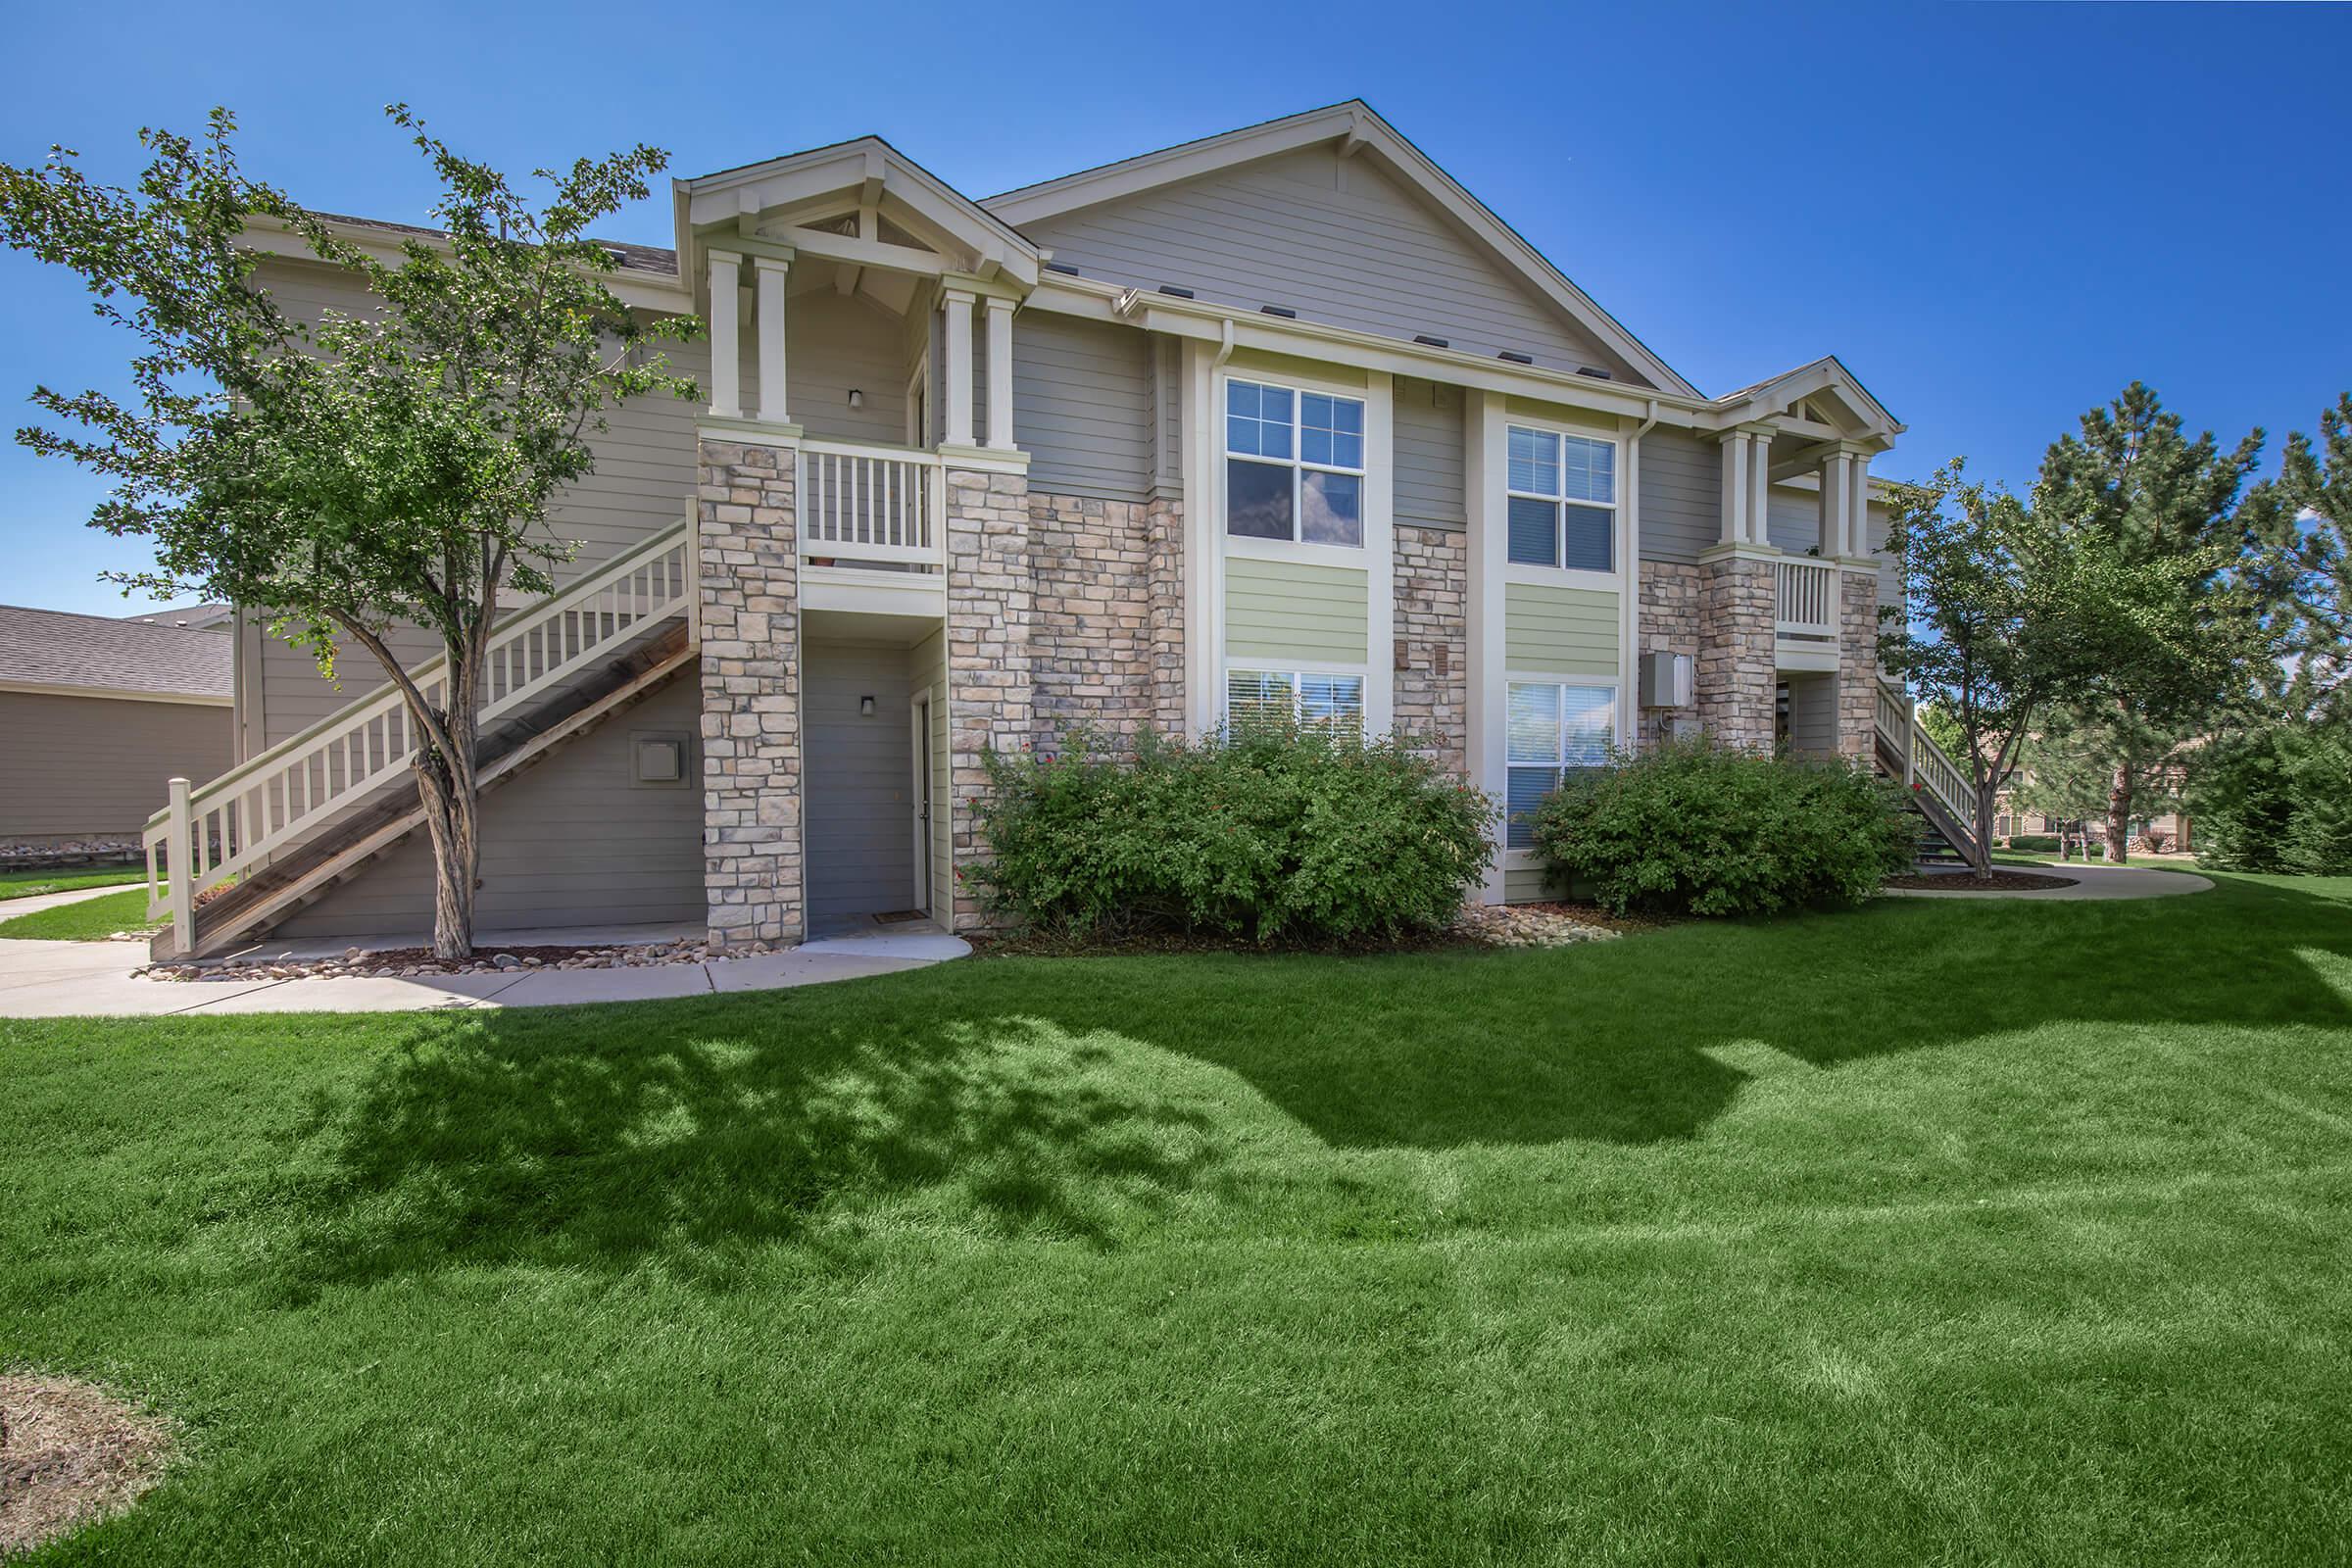 APARTMENTS FOR RENT IN WESTMINSTER, CO